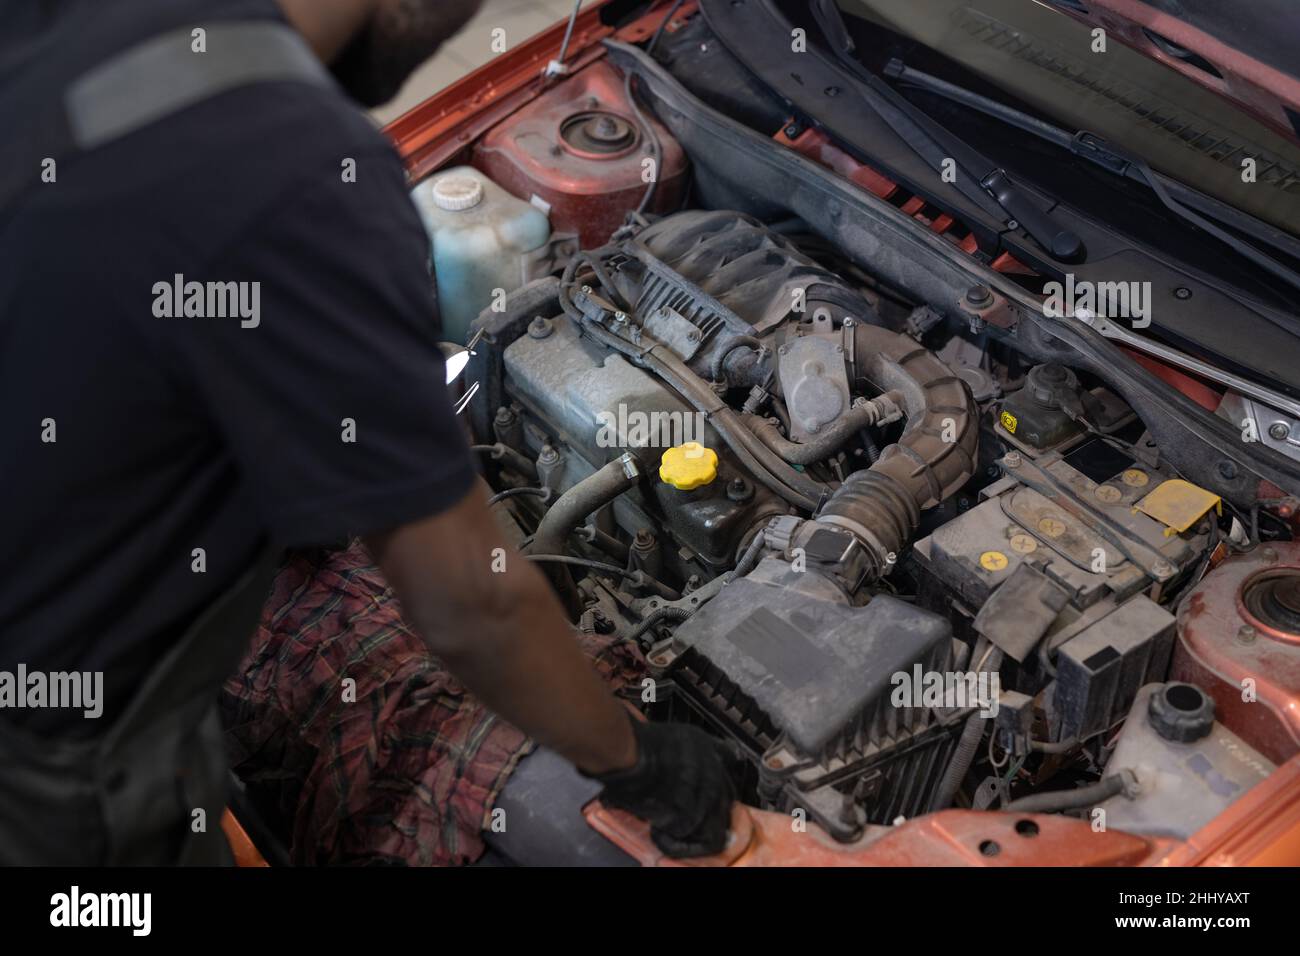 Part of young automechanic in workwear checking engine of car while standing by open hood with motor Stock Photo